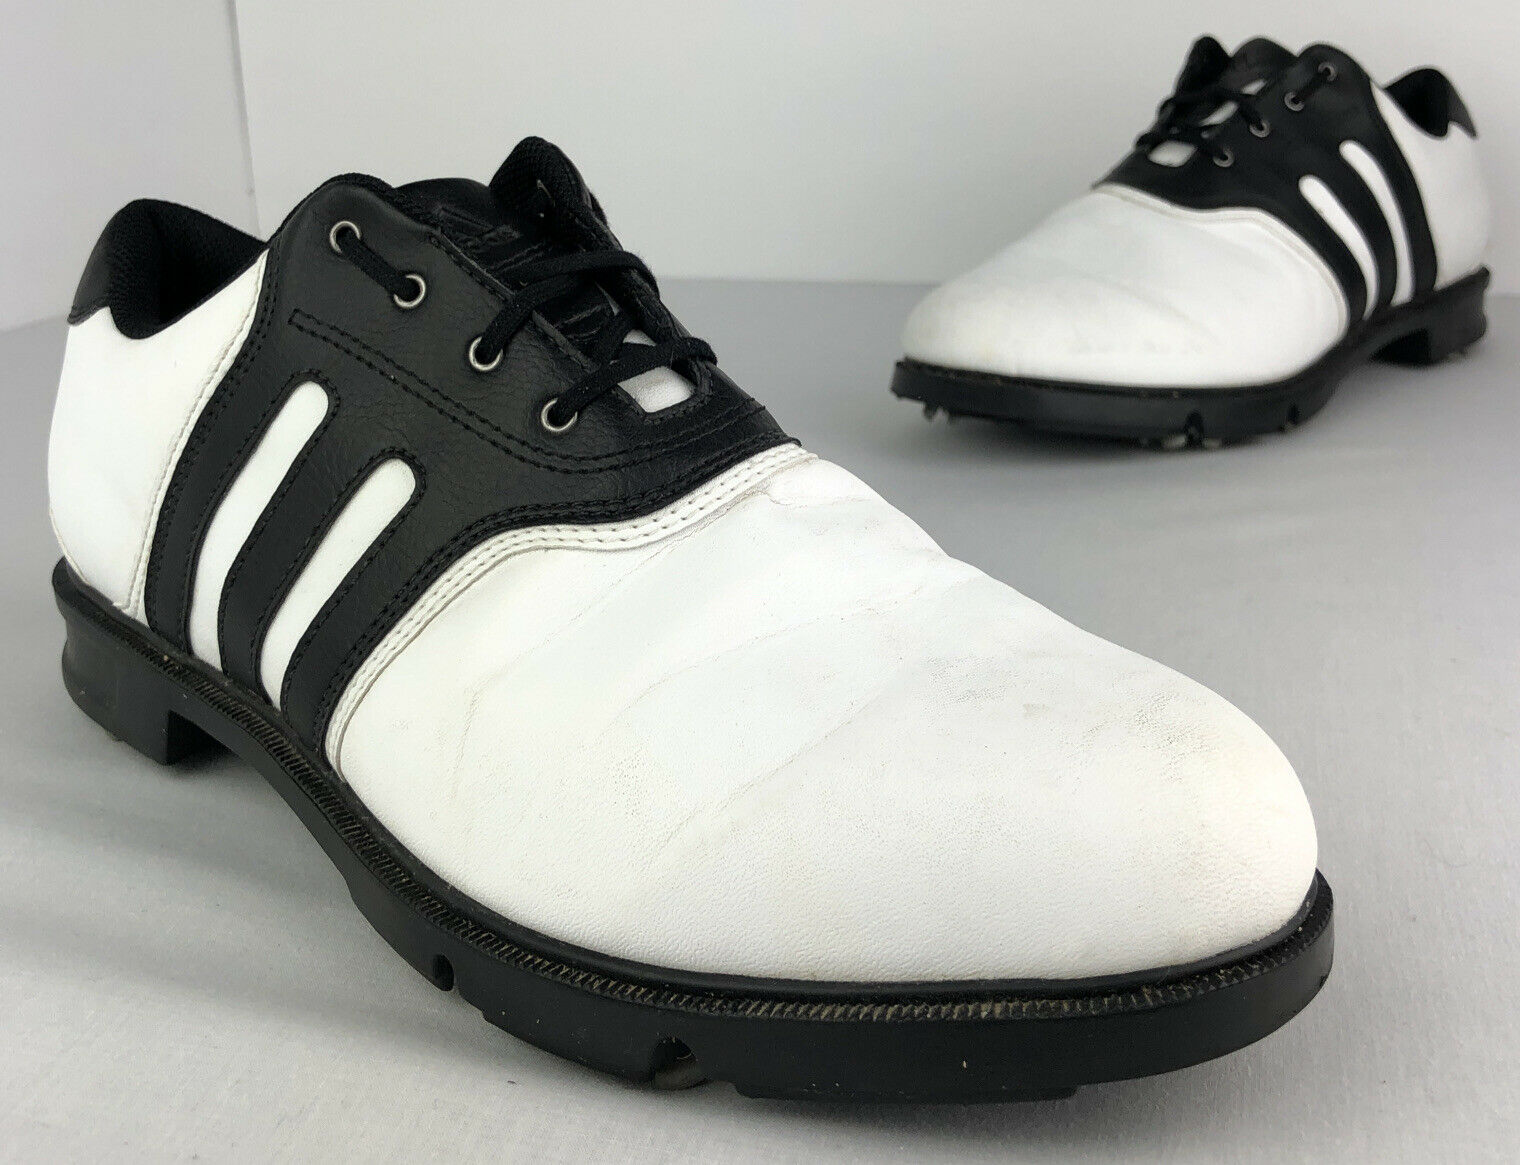 Adidas SL Z Traxion Golf Shoes Men’s Size 8.5 Lace Up Spiked Leather White